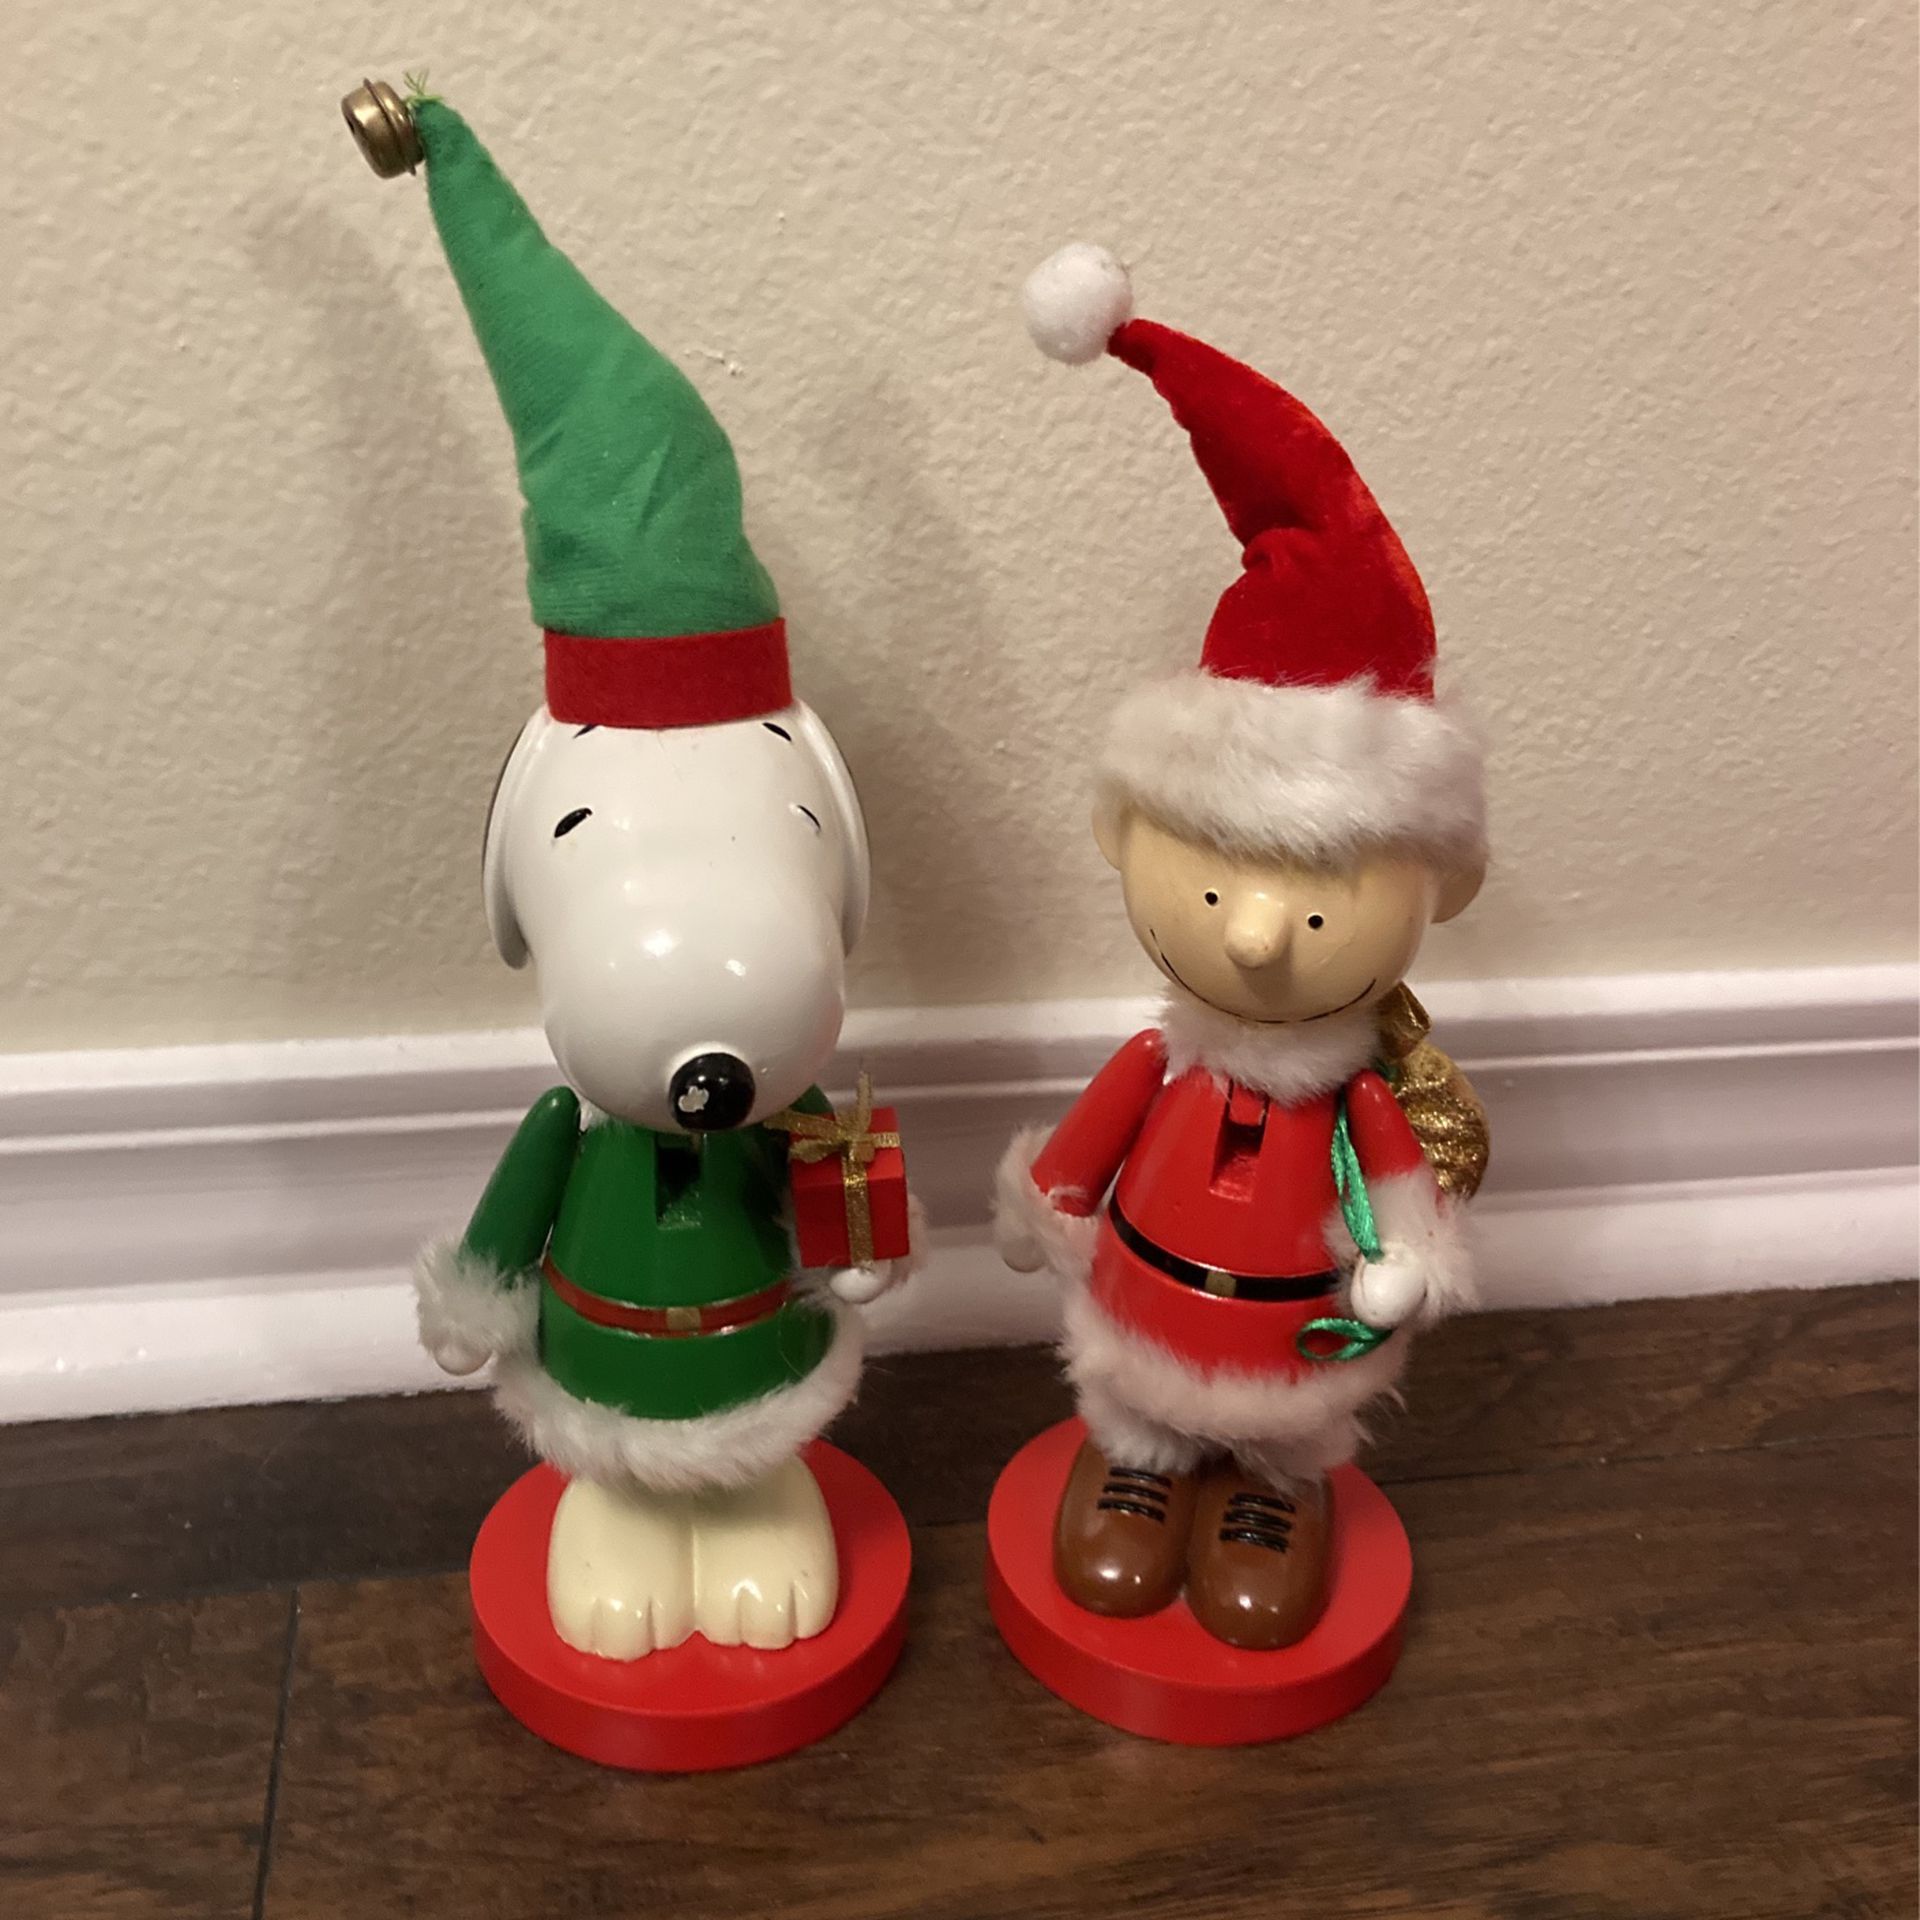 Snoopy and Charlie Brown Decorative Nutcrackers